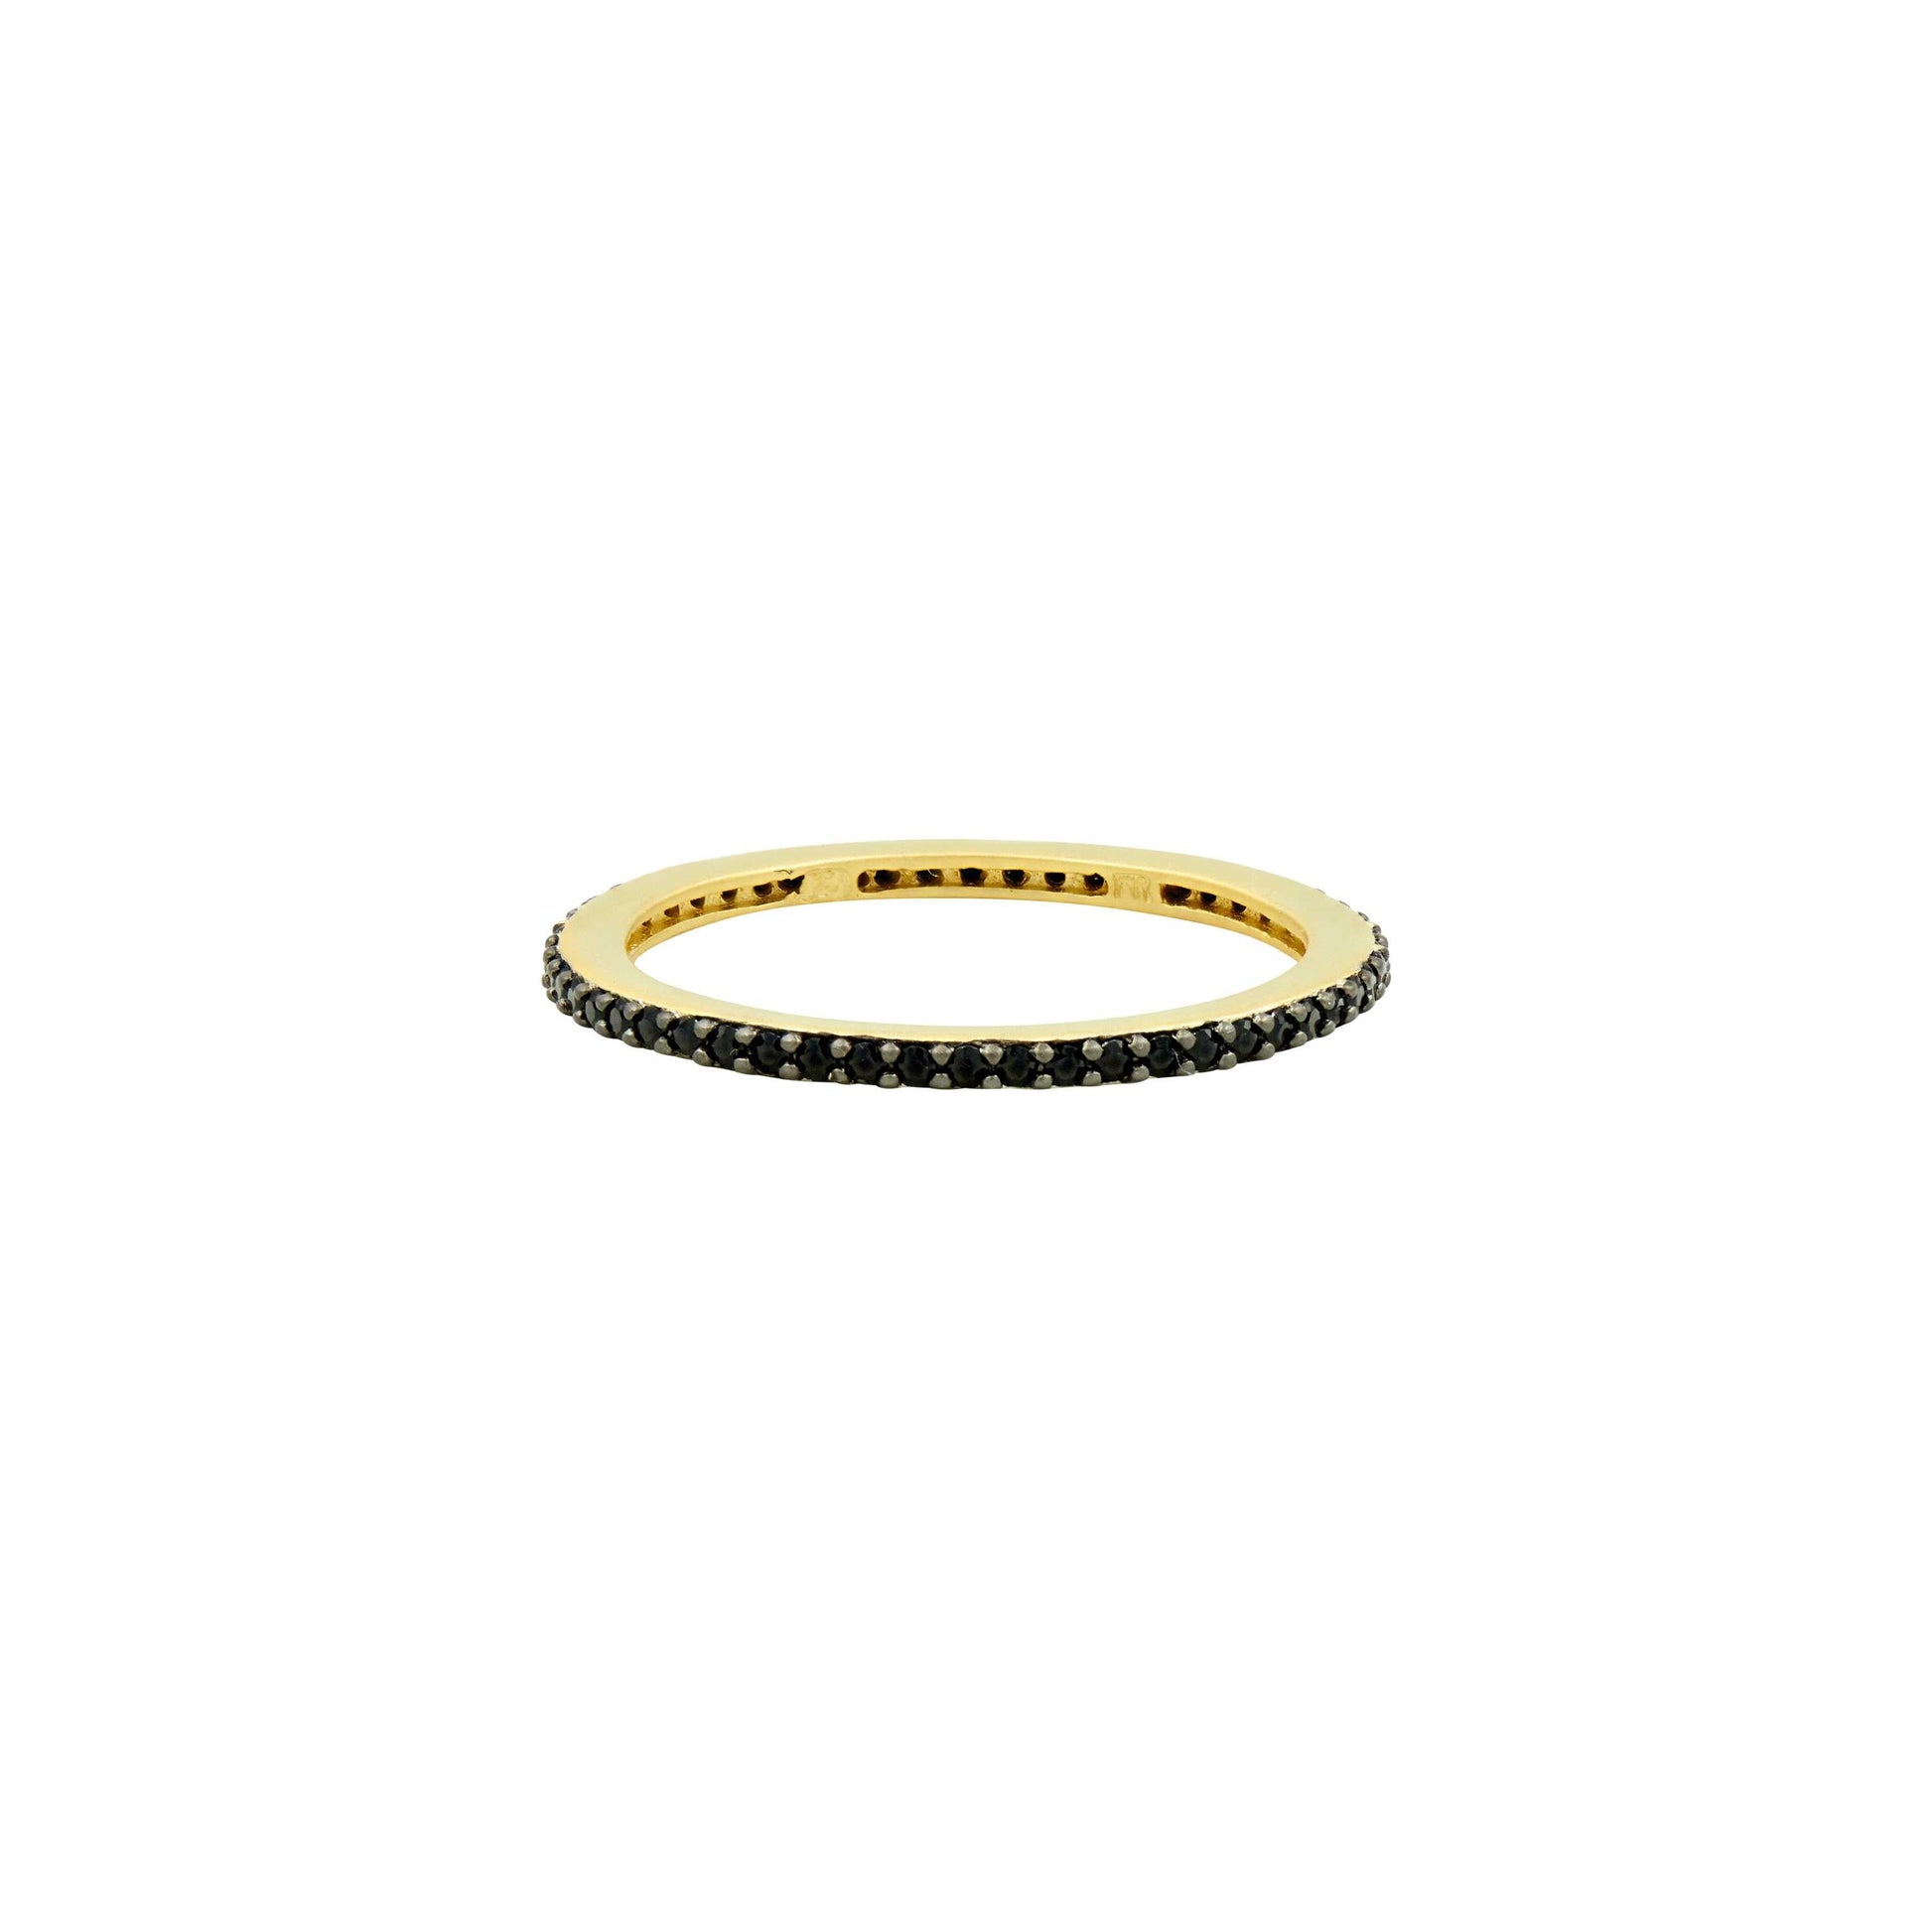 GoldBlack-BlackCubicZirconia9 All Pavé Stack Ring RINGS FOR STACKING RING